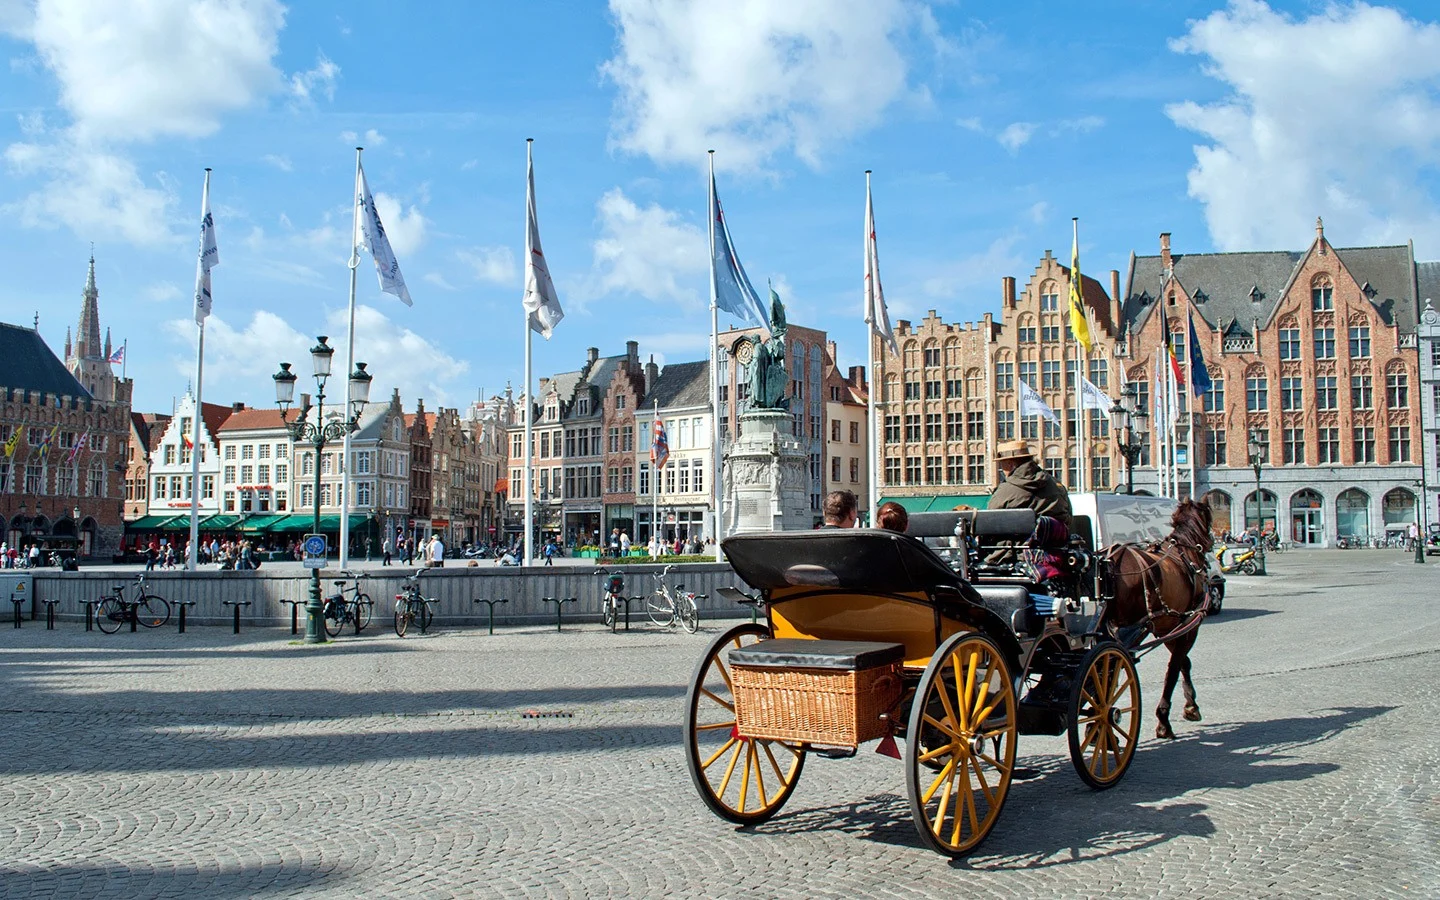 Horse and carriage in the Grote-Markt in Bruges, Belgium